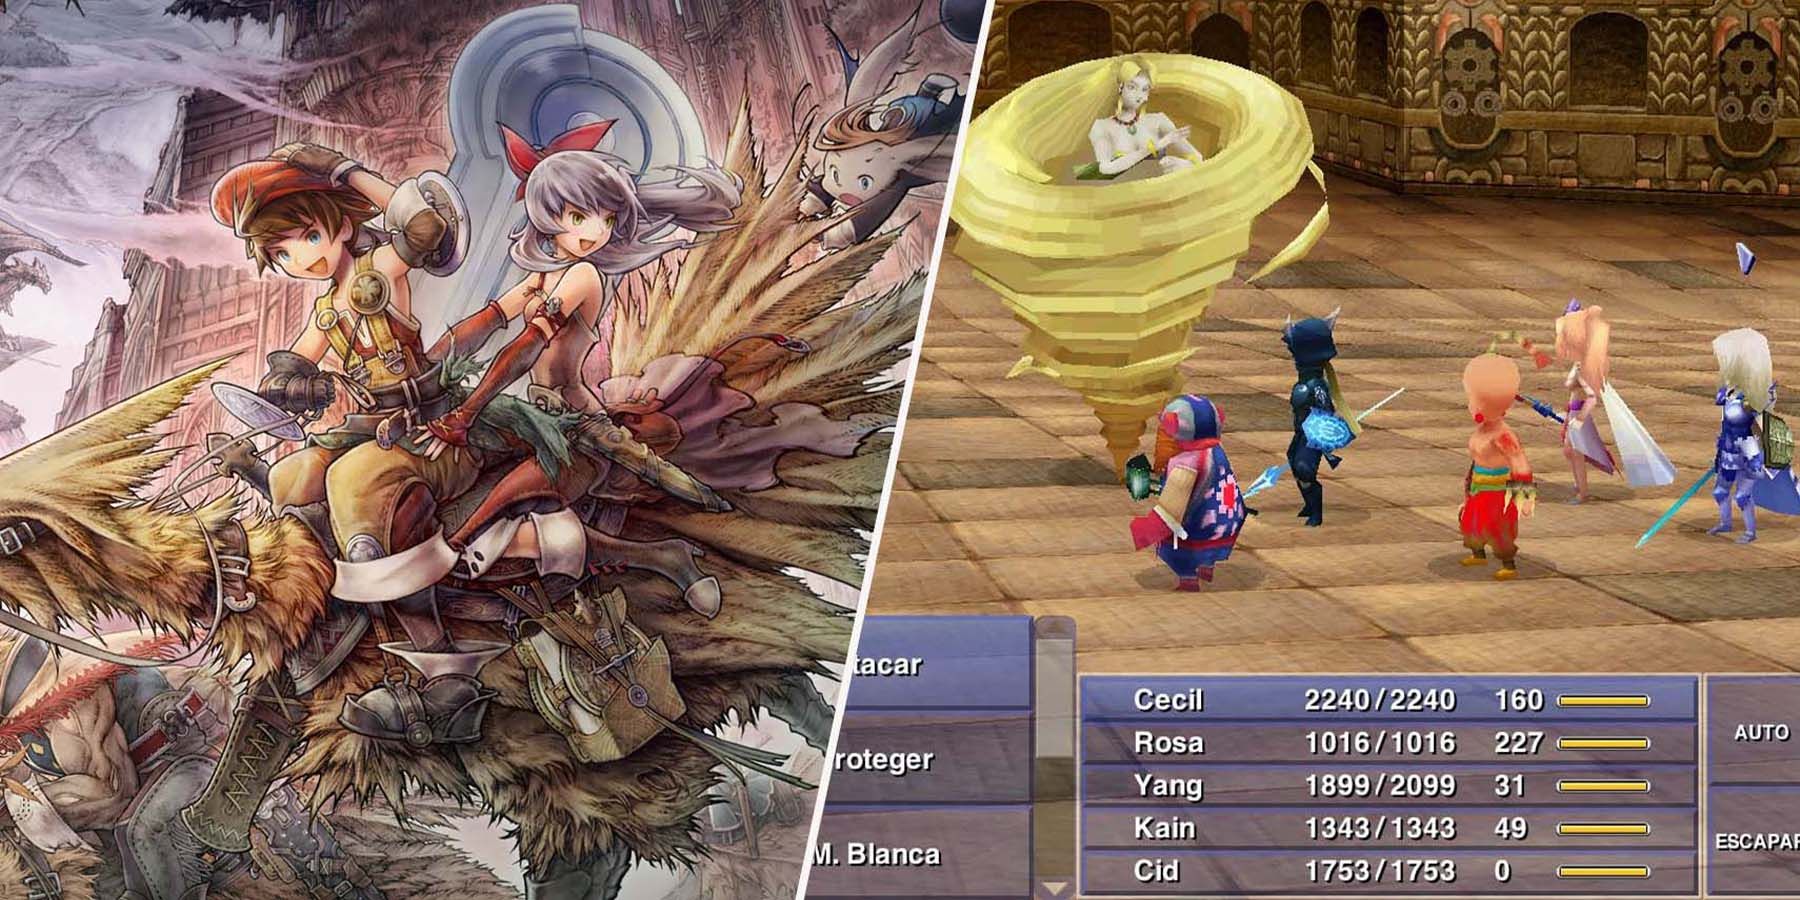 Ranking the mainline Final Fantasy games on Nintendo Switch